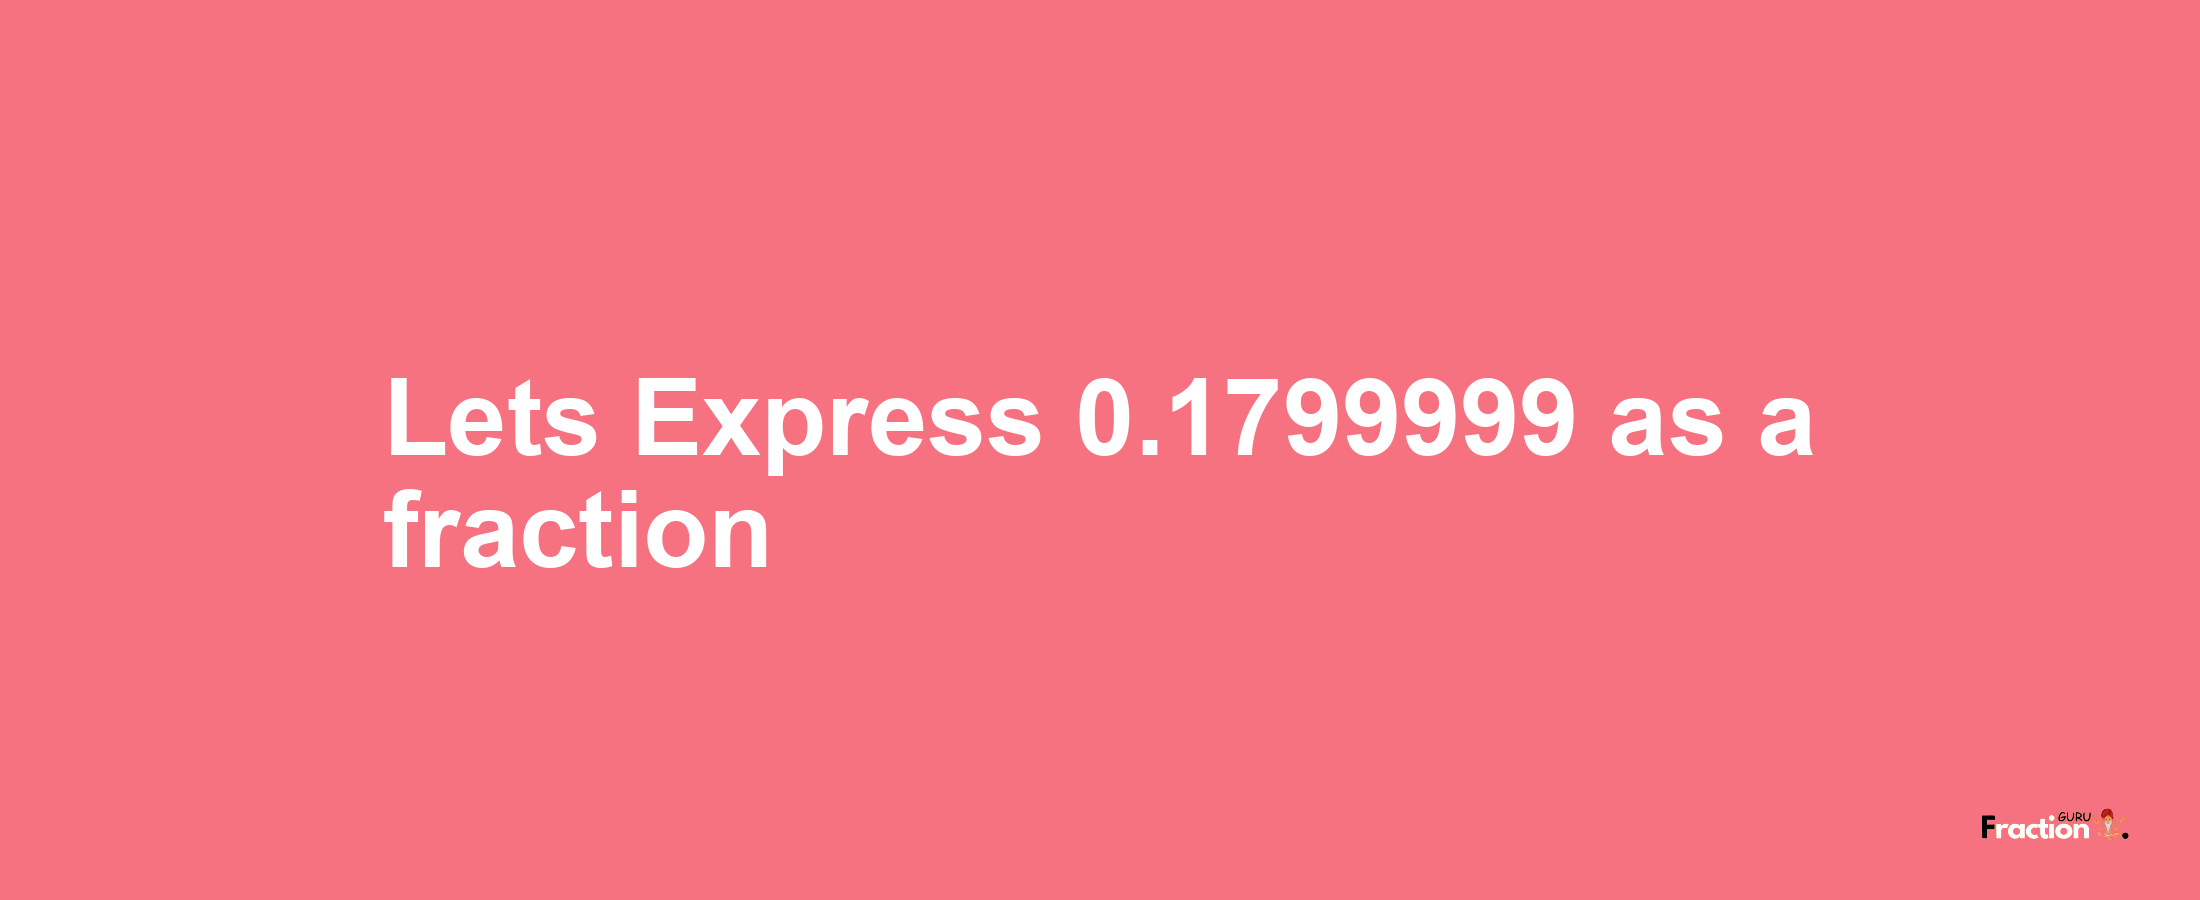 Lets Express 0.1799999 as afraction